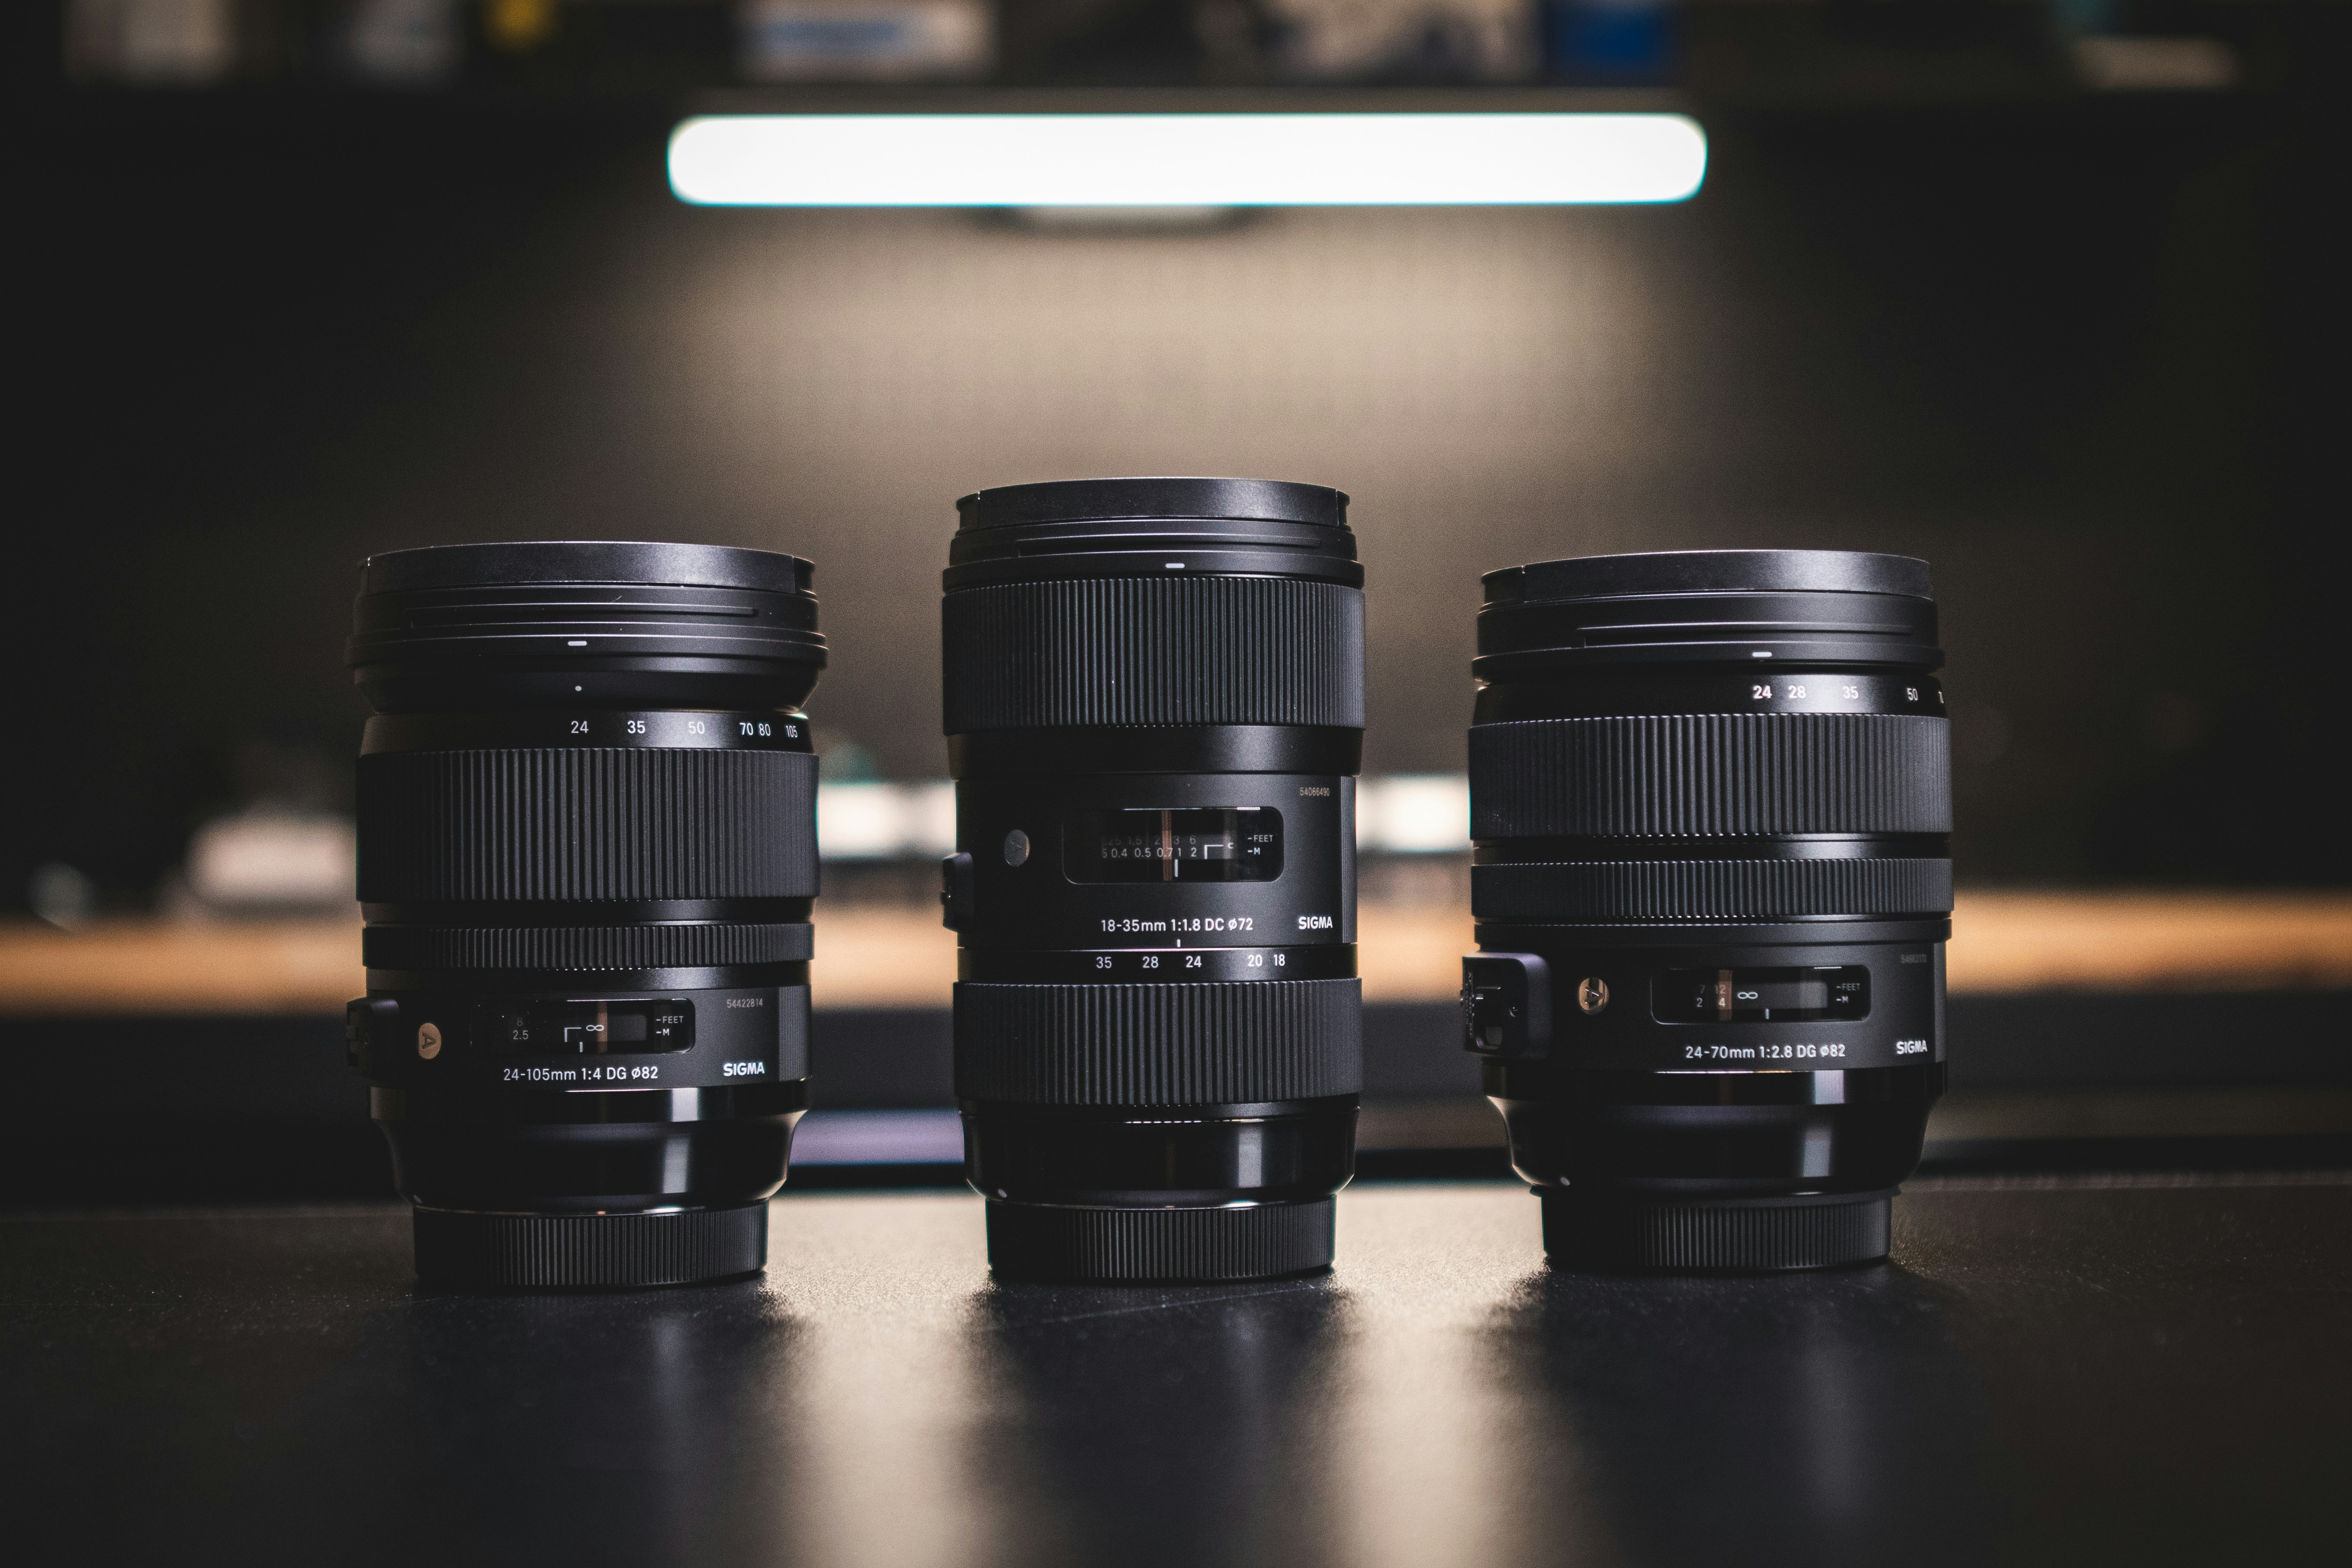 We don't usually carry lenses, but when we do, we prefer Sigma. The Art Series 18-35mm, 24-70mm, and 24-105mm, now available to buy locally at Voice & Video Sales.